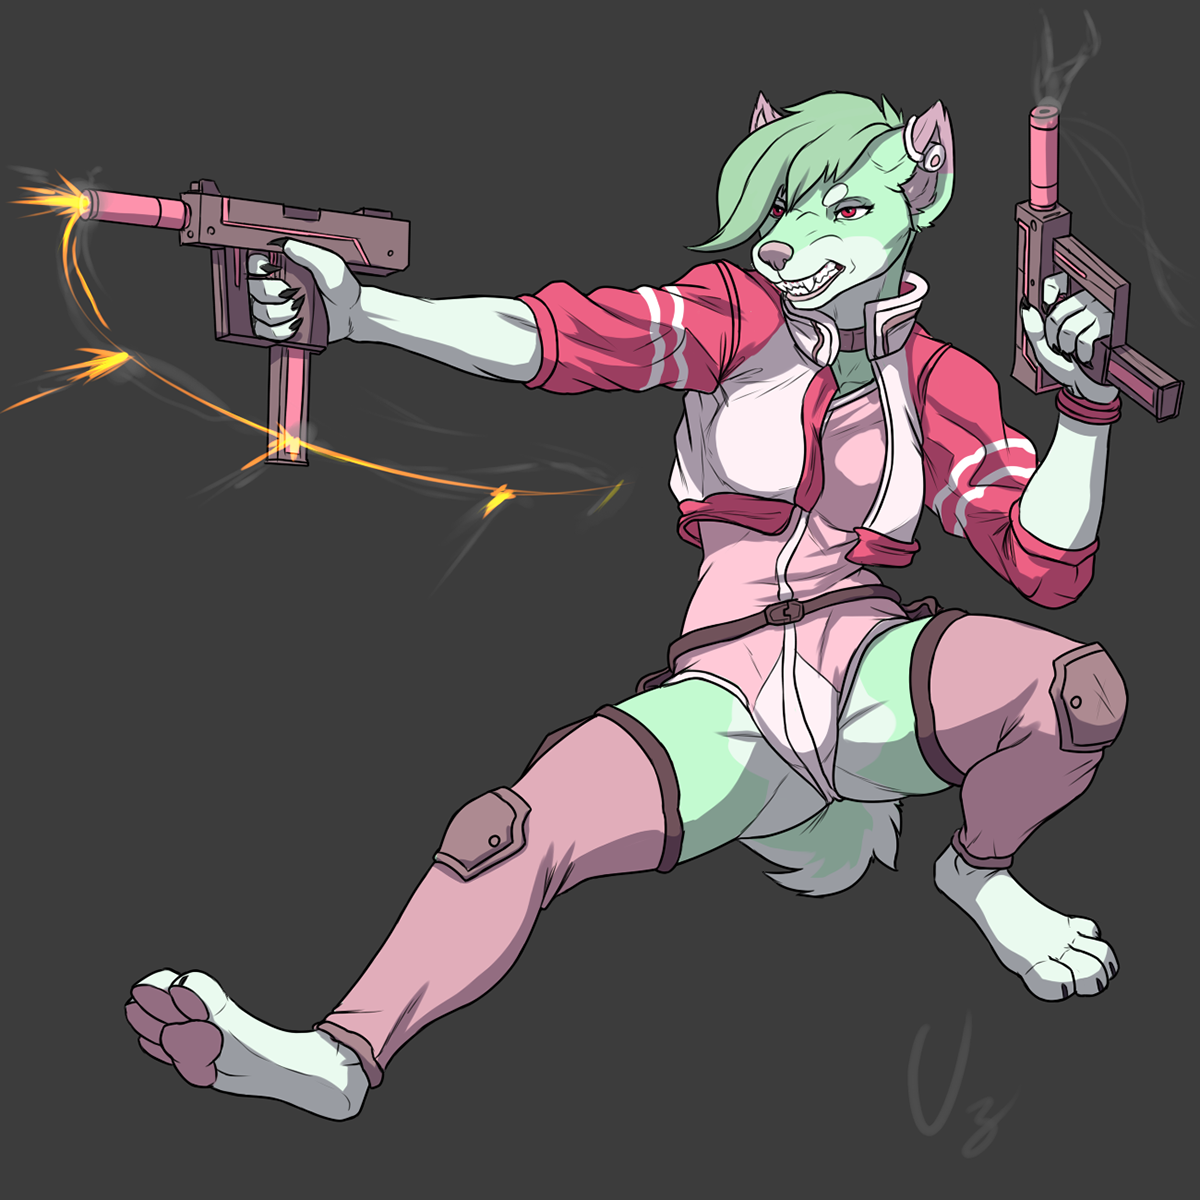 anthro female furry green greenhair pink Weapon commission